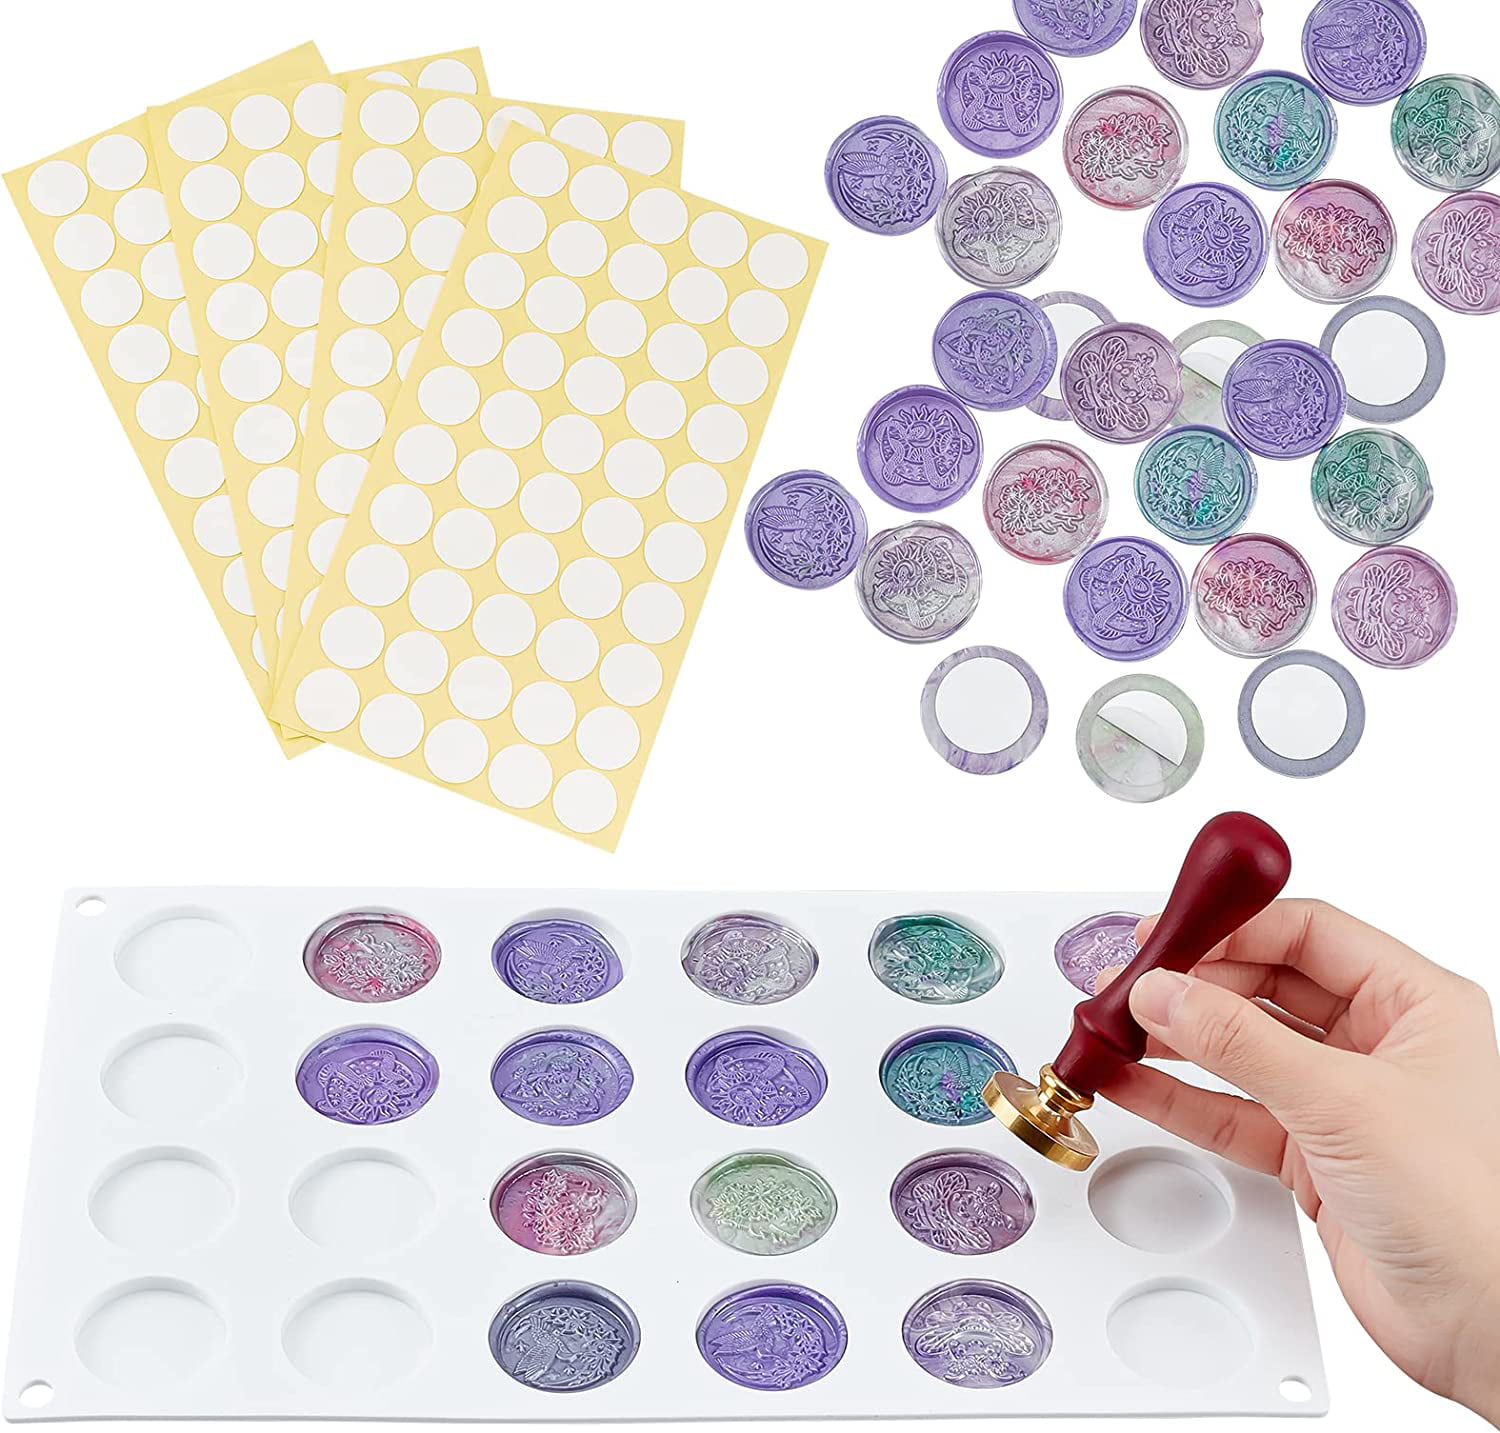  Silicone Mat Pad for Wax Seal Stamp,24 Cavity Wax Sealing Mat  Pad with 50 Pcs Removable Double-Sided Adhesive Sticky Dots for DIY Craft  Adhesive Waxing Sealing Wax Seal Stamp Stickers 